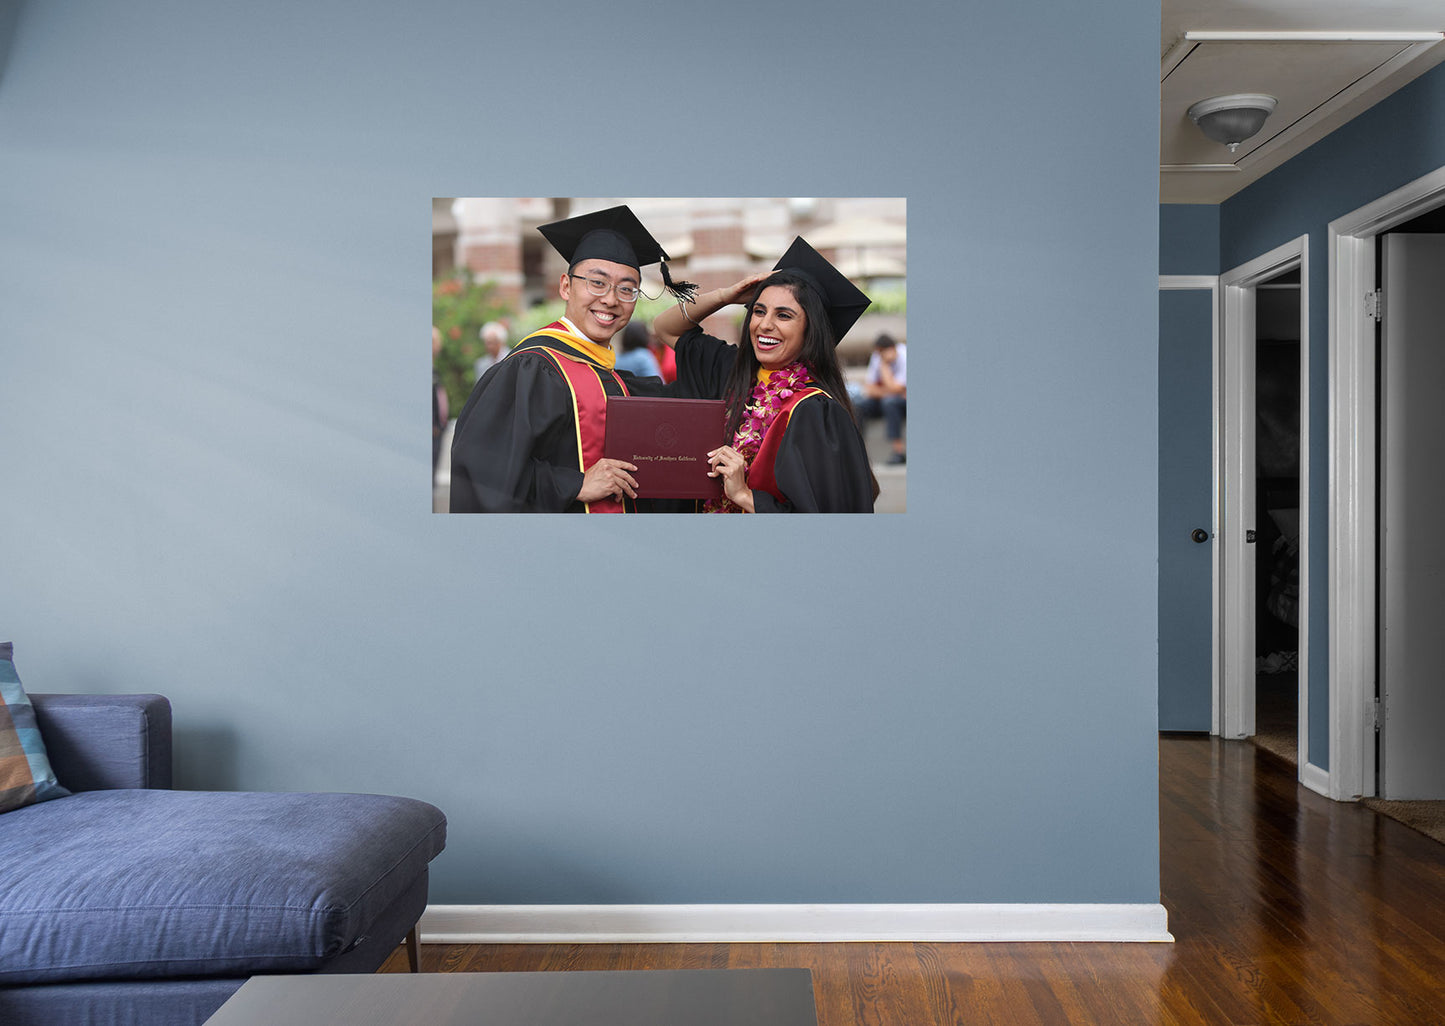 Join the Fathead Nation with a custom fathead graduation mural of your friend, kid, or even yourself on a special day! Made of high-quality materials, you'll find these custom graduation murals are durable and colorful. It makes the perfect gift, only your imagination will limit the subjects and uses of these custom big heads.